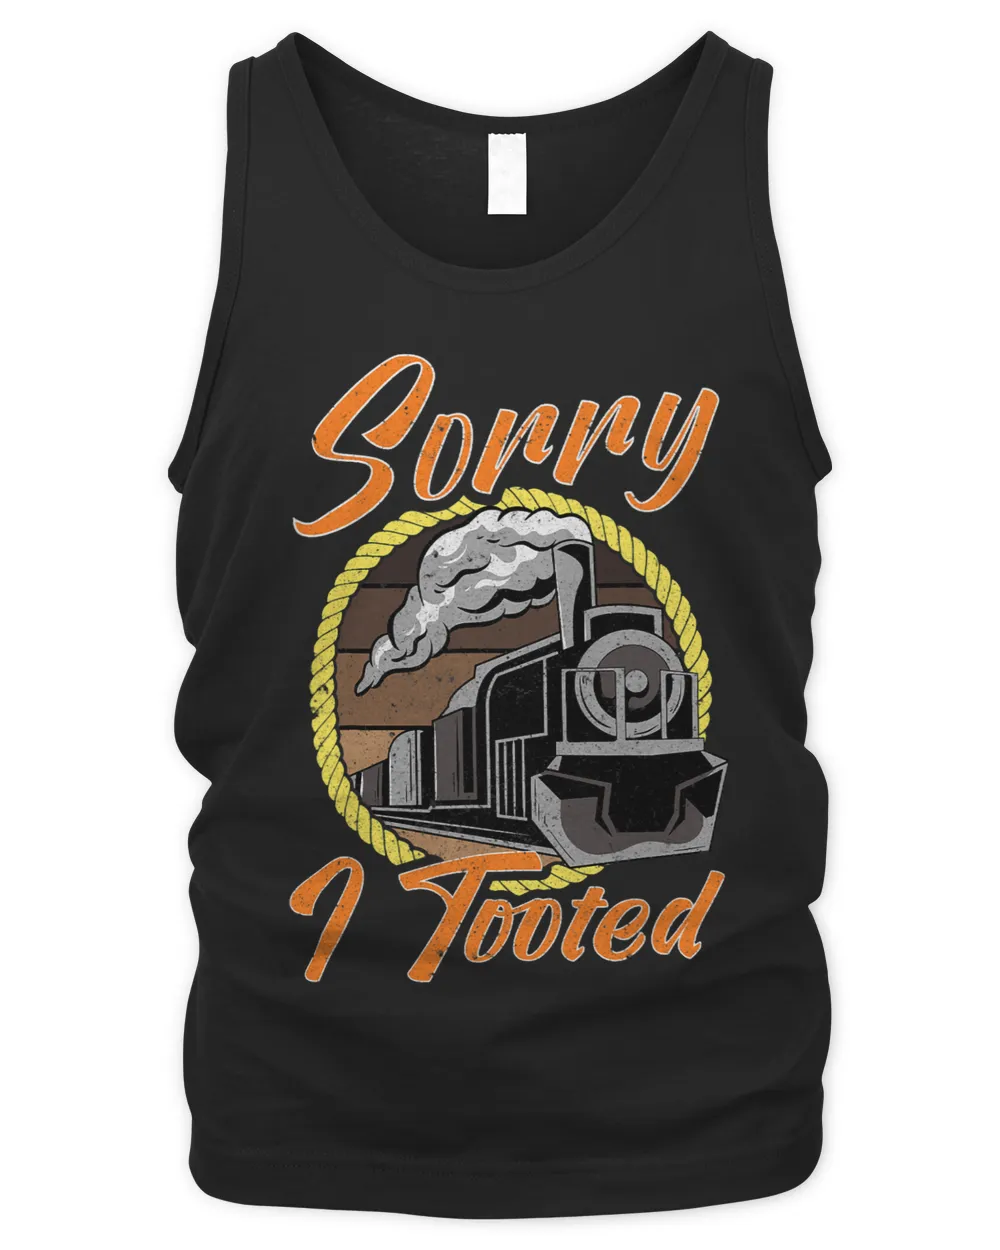 Sorry I Tooted Train EngineerTrain Lover Railroad Gift